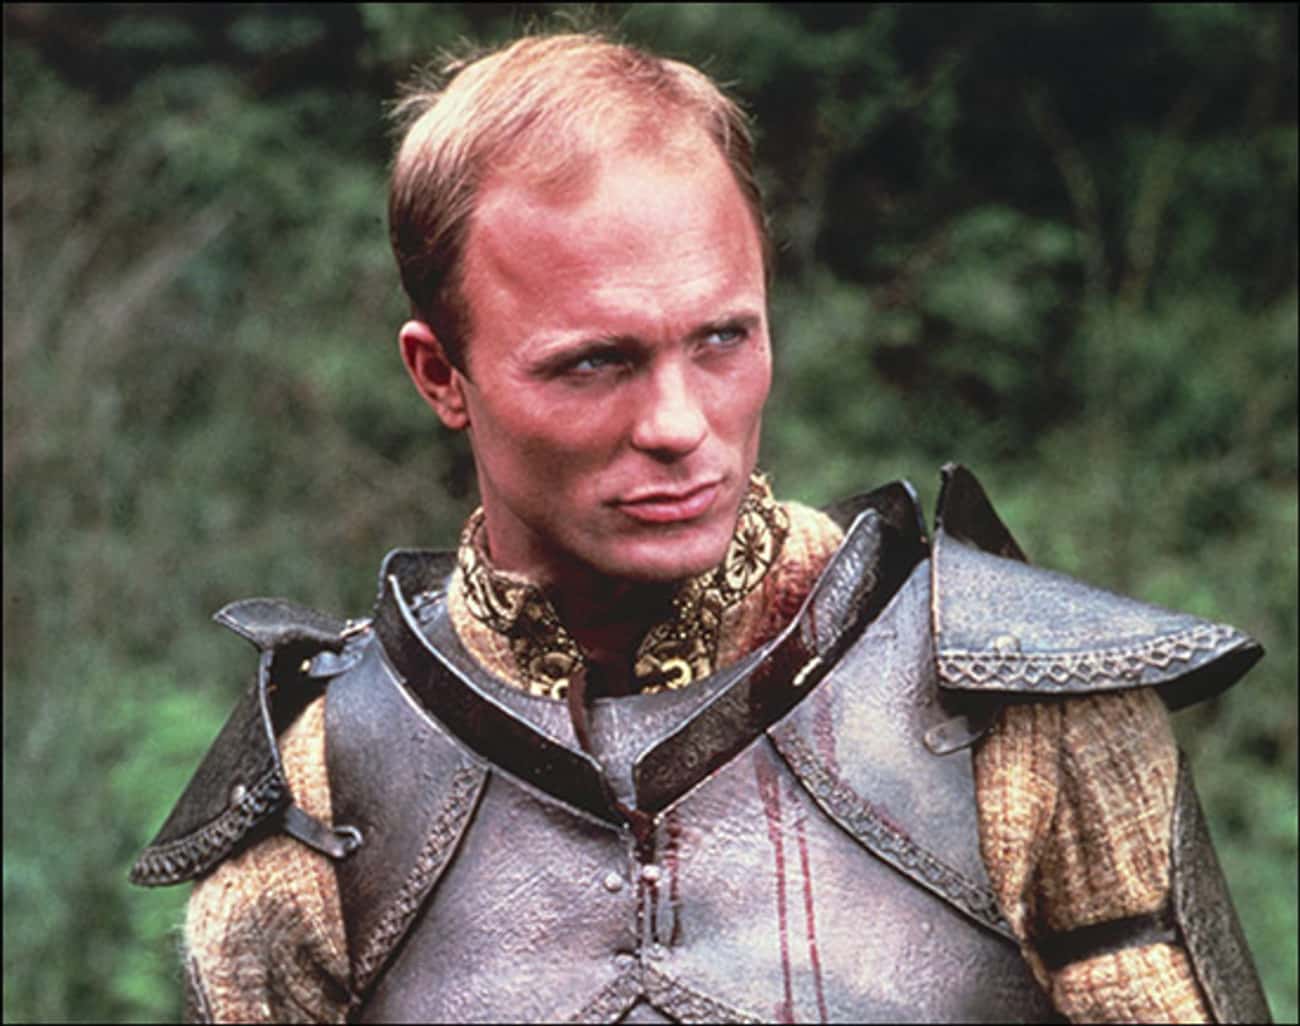 Young Ed Harris in Medieval Attire